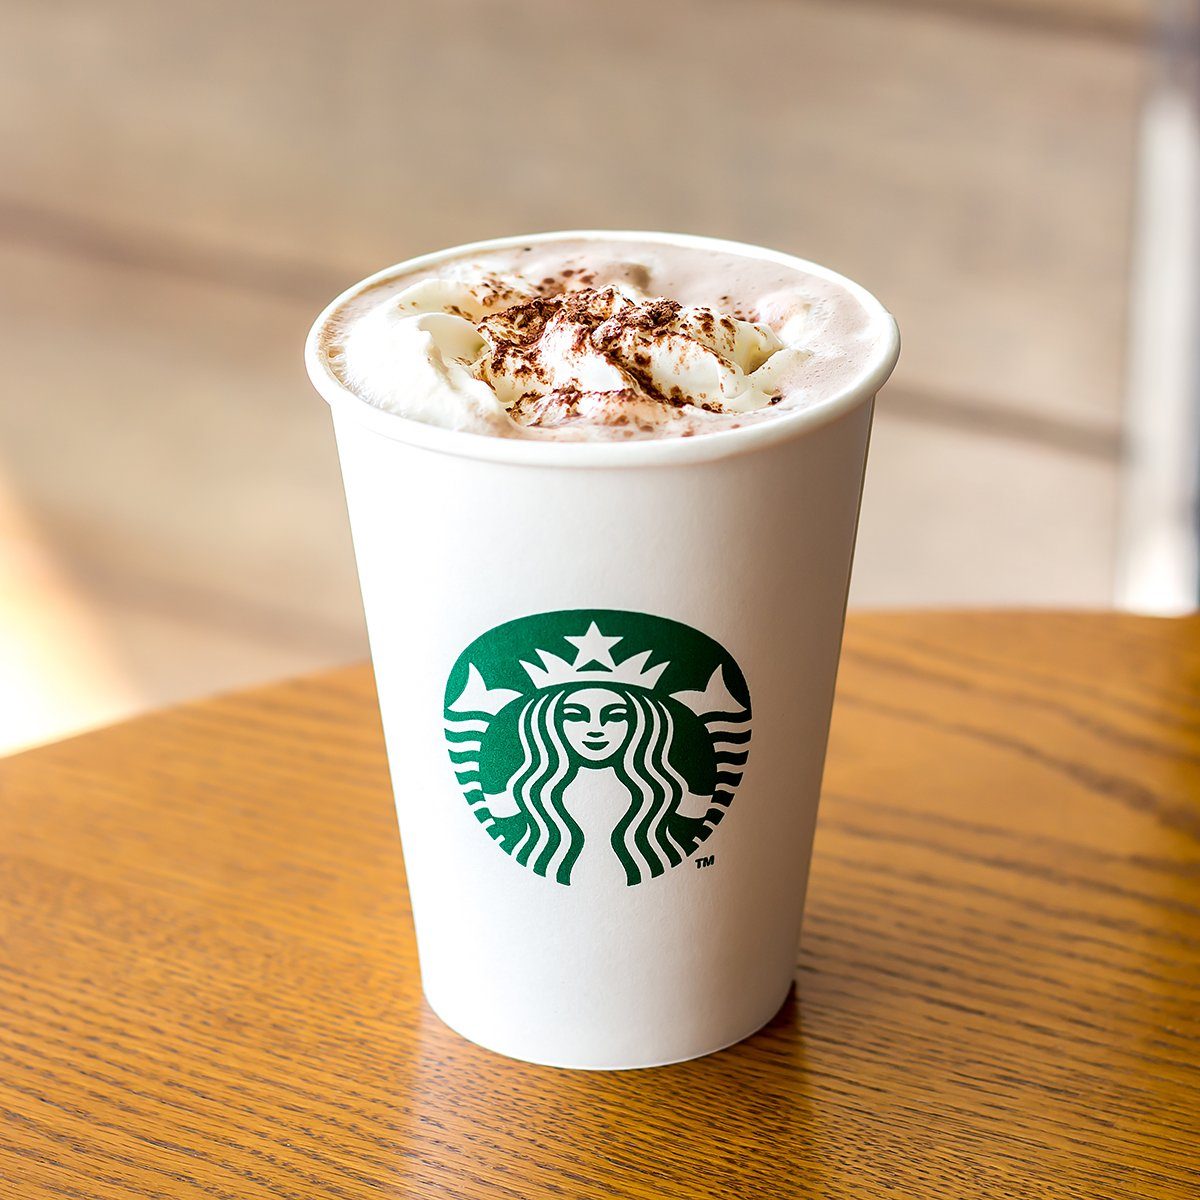 Starbucks Hot chocolate and whipping cream in white paper cup on wooden table 